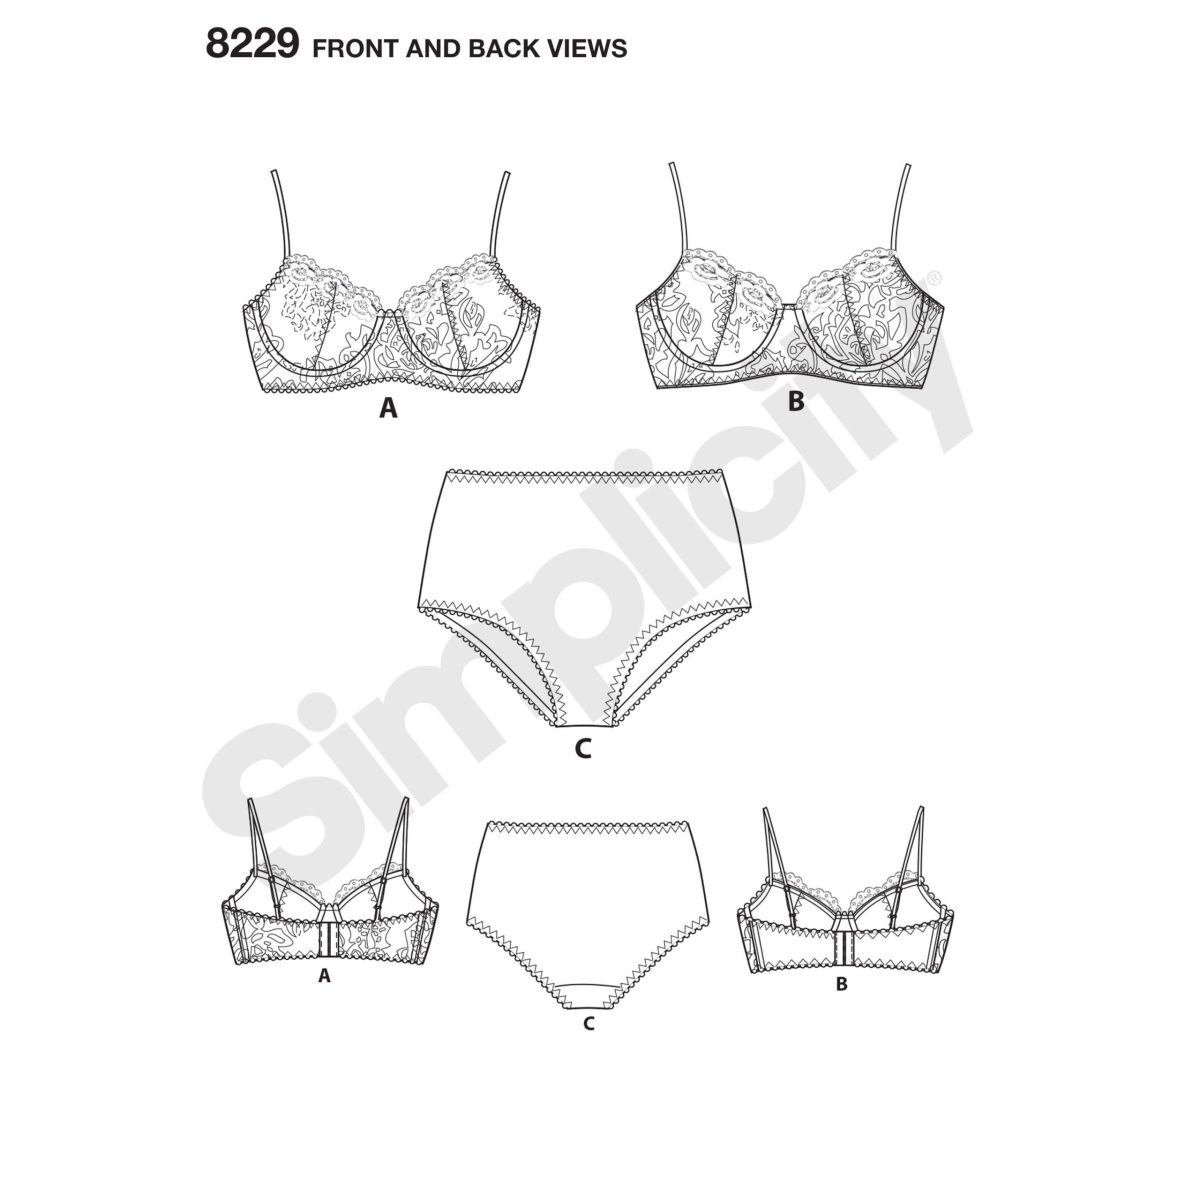 Simplicity Pattern 8229 Misses' Underwire Bras and Panties